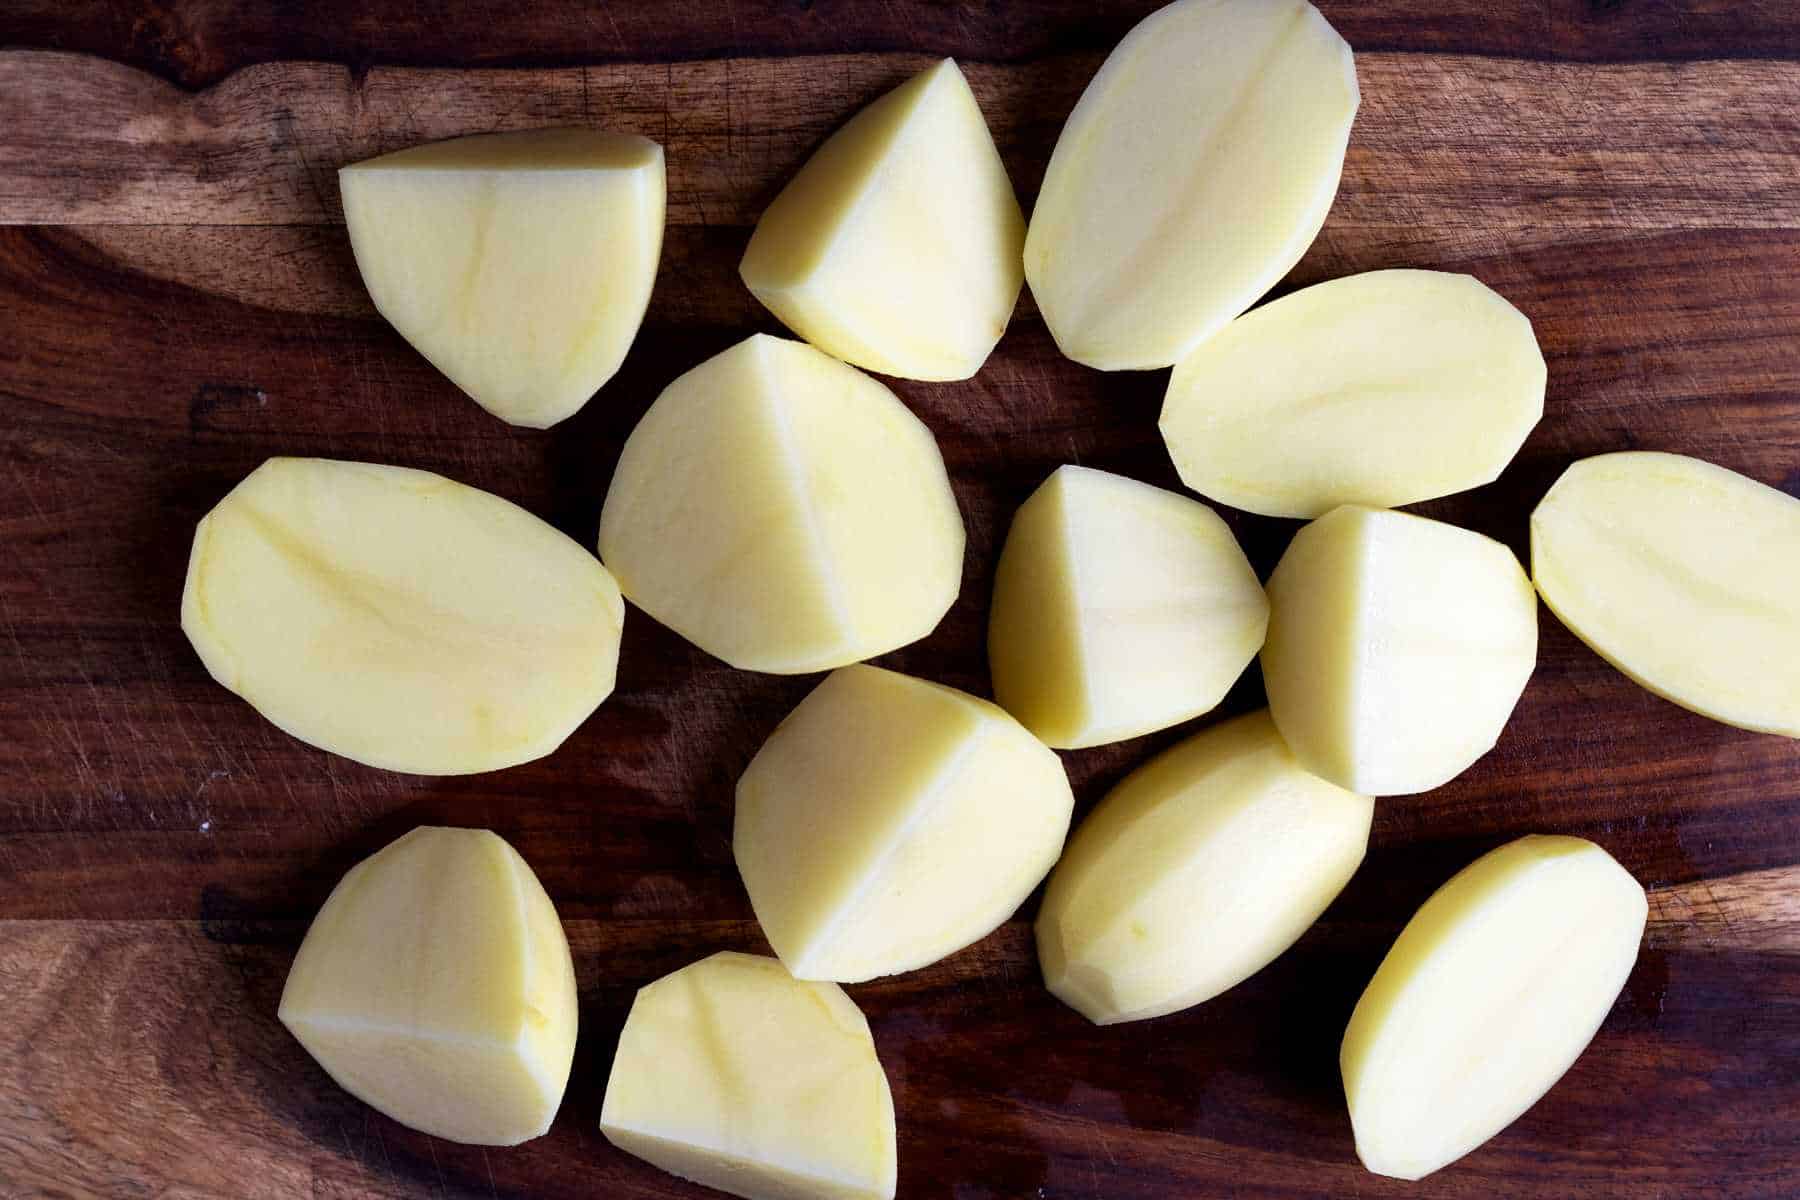 Potatoes cut in pieces.